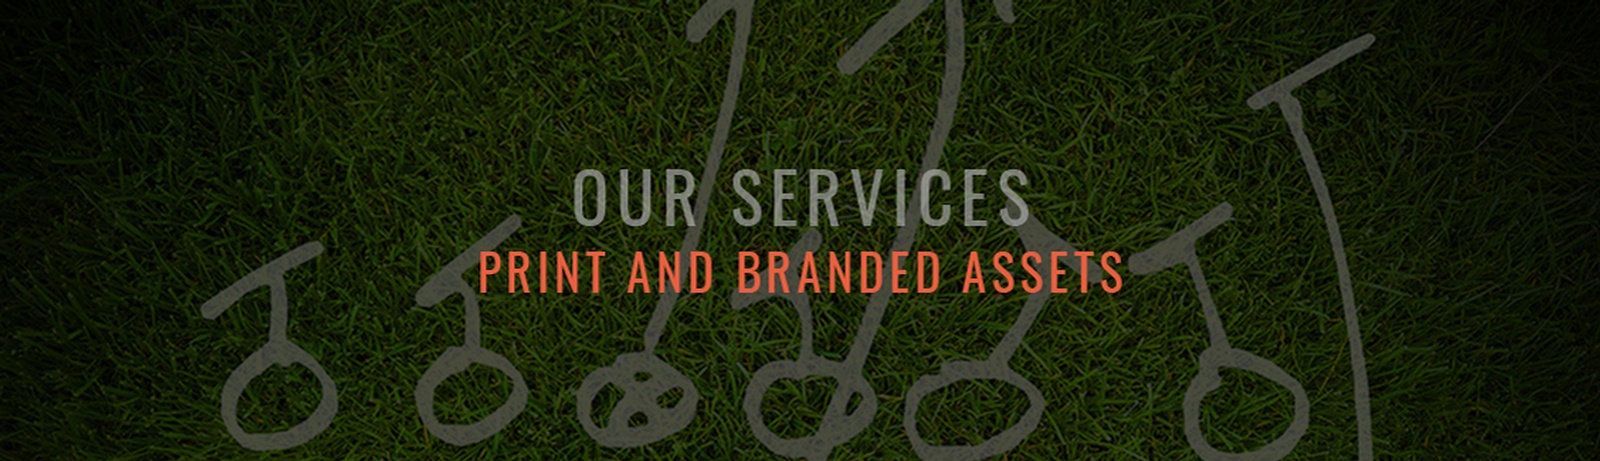 Print and Branded Asset Services by Hurst Digital